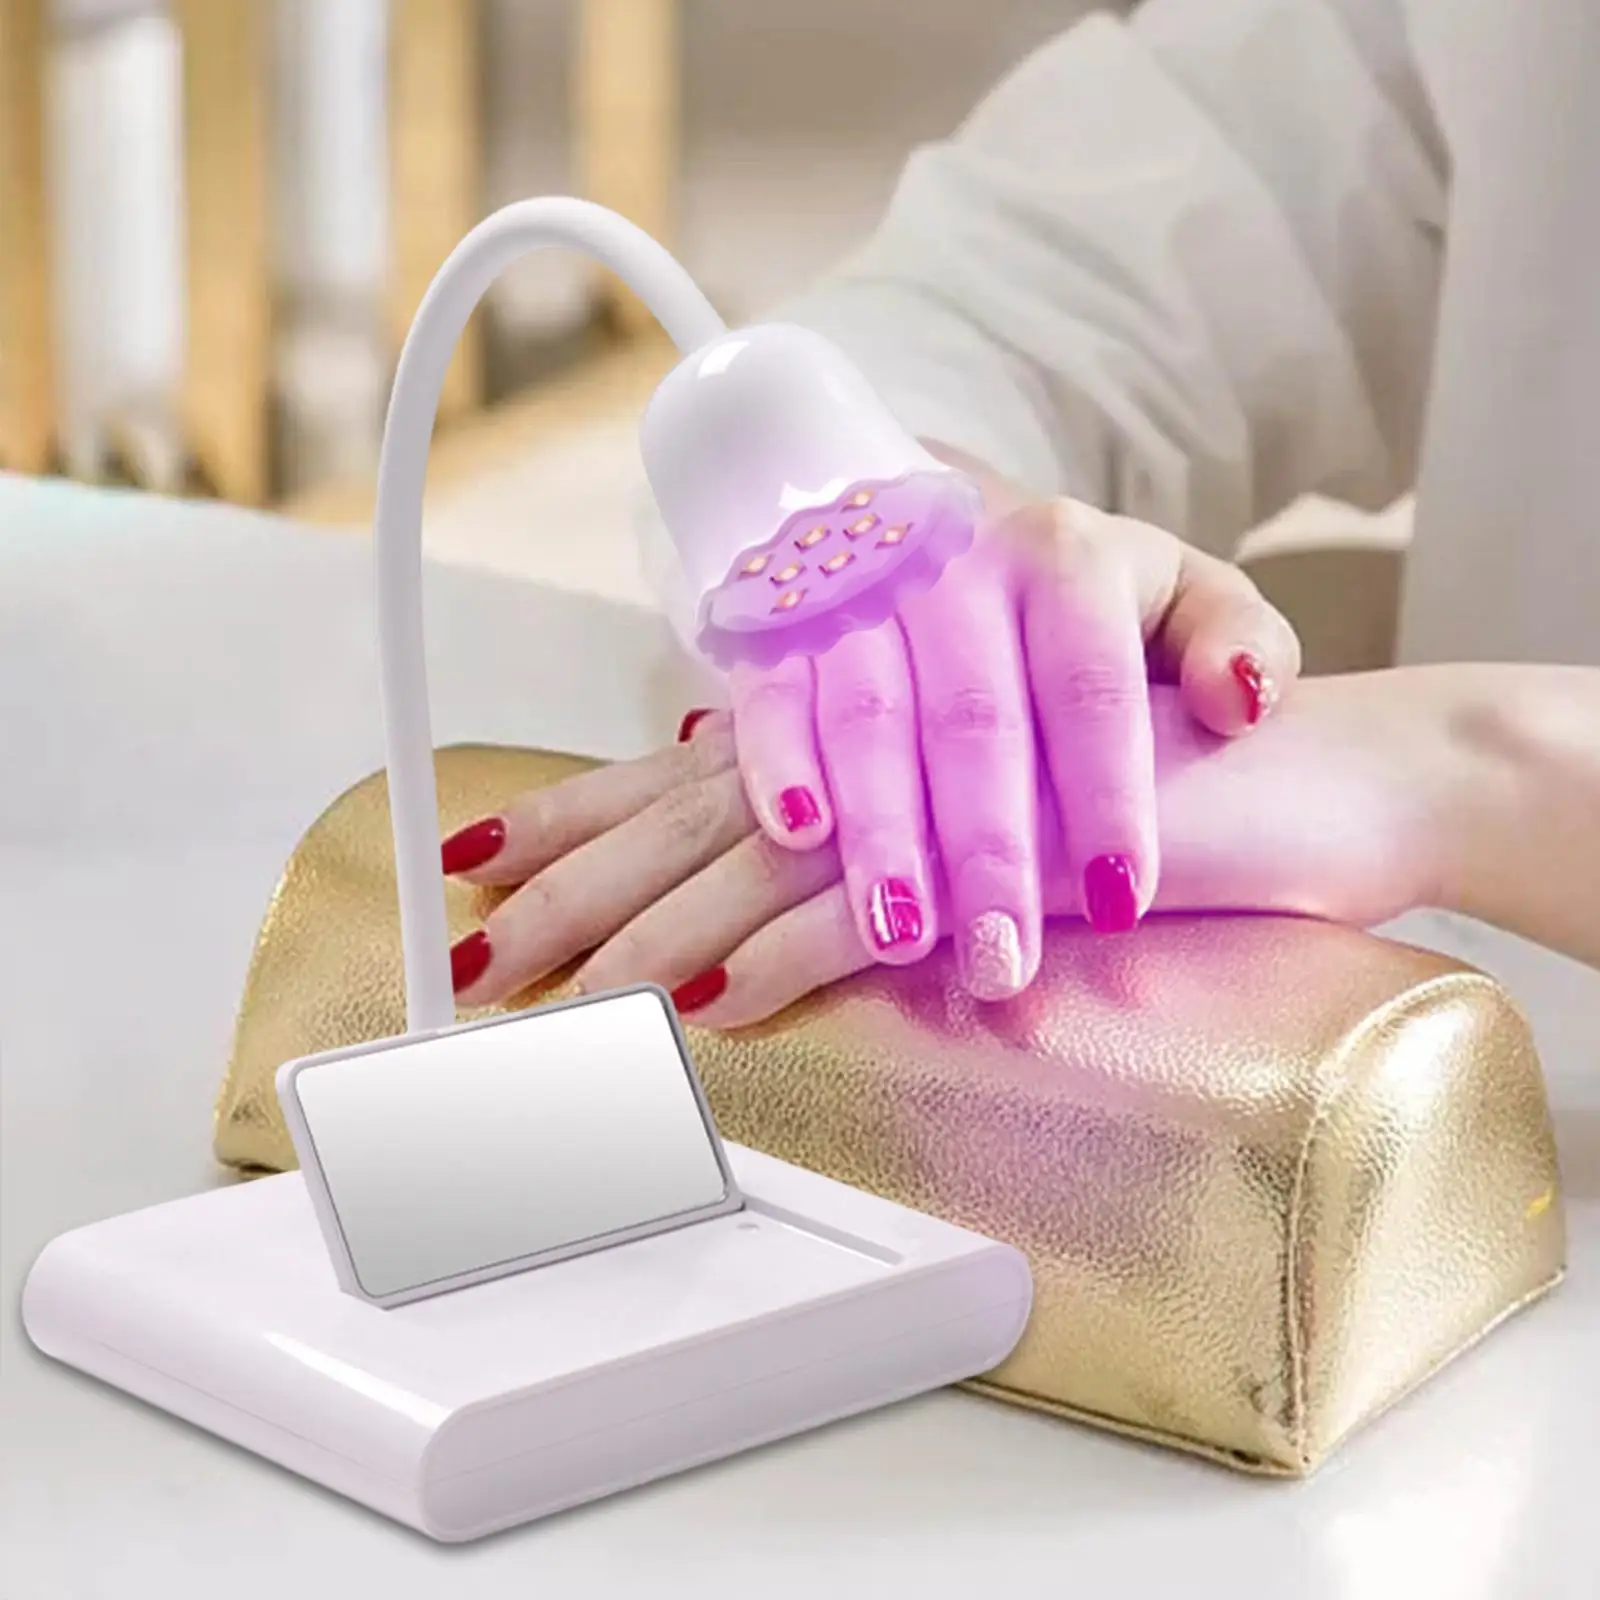 LED Nail Lamp with Mirror 360 Degree Rotatable 20W Portable Professional with 8Pcs LED Nail Dryer Machine for Fingernail